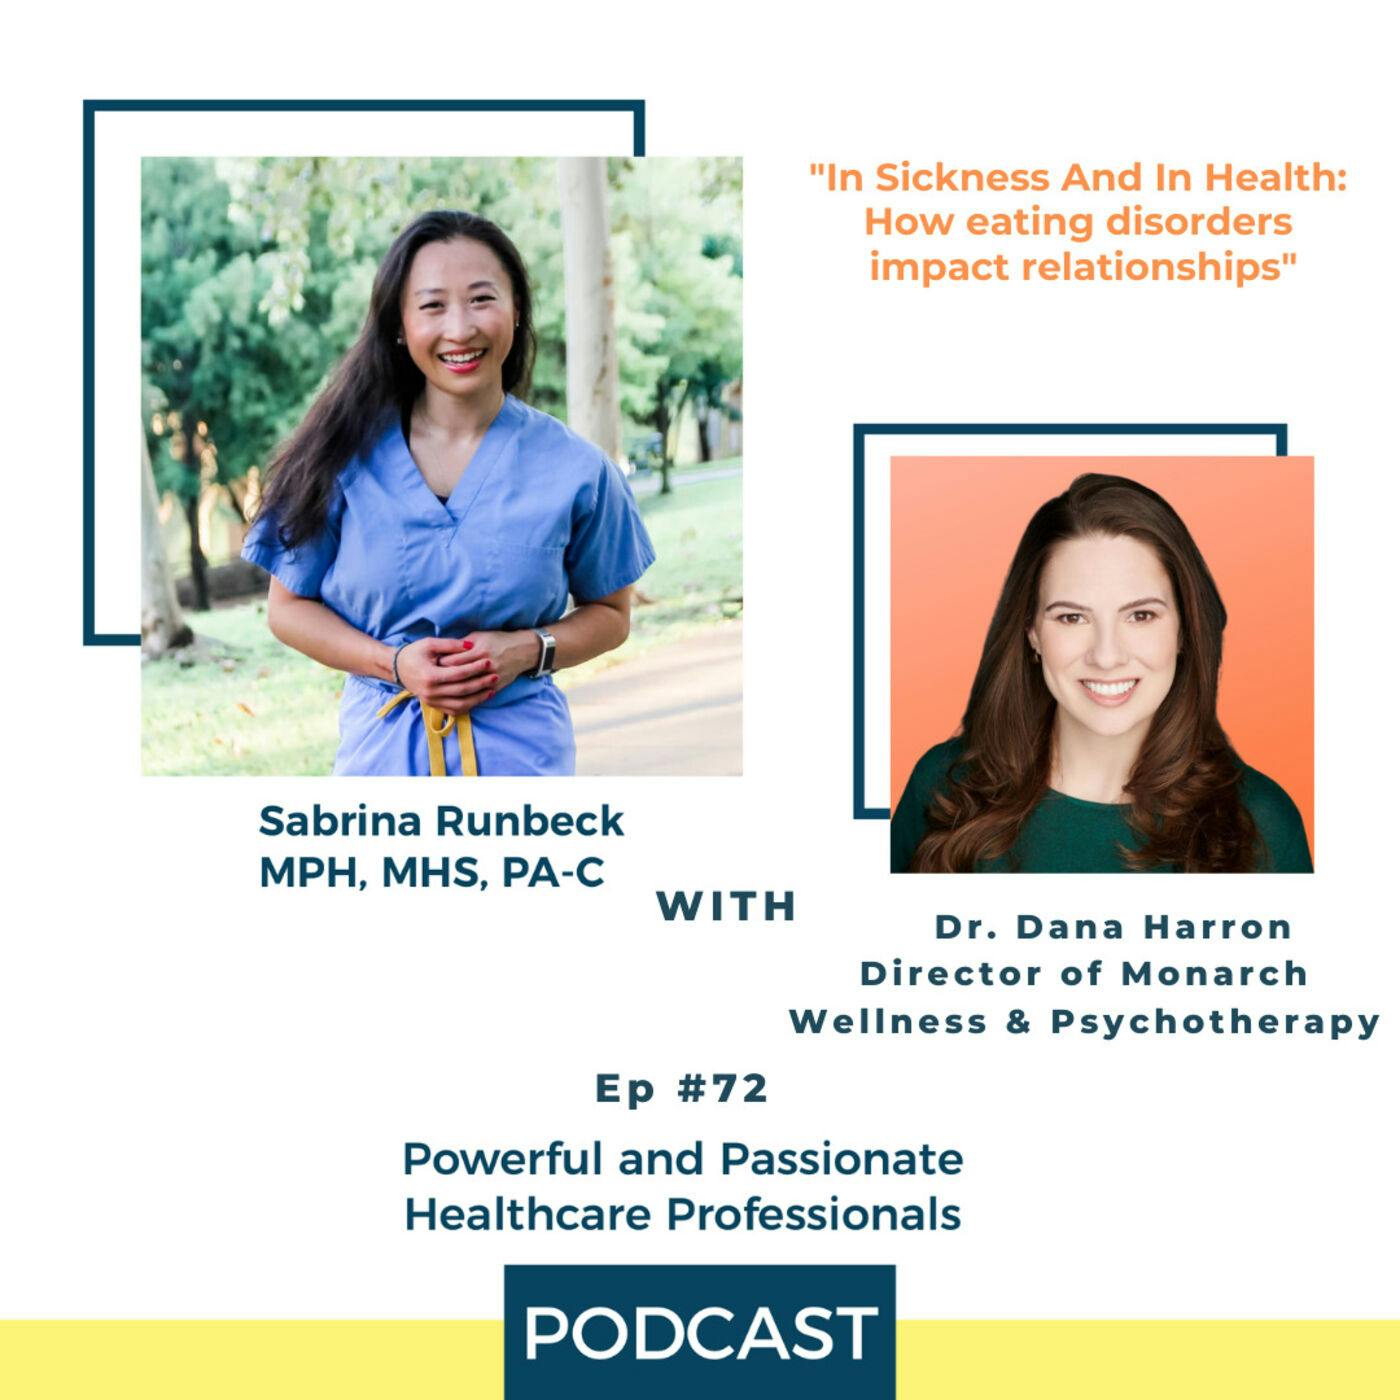 Ep 72 – In Sickness and In Health: How eating disorders impact relationships with Dr. Dana Harron